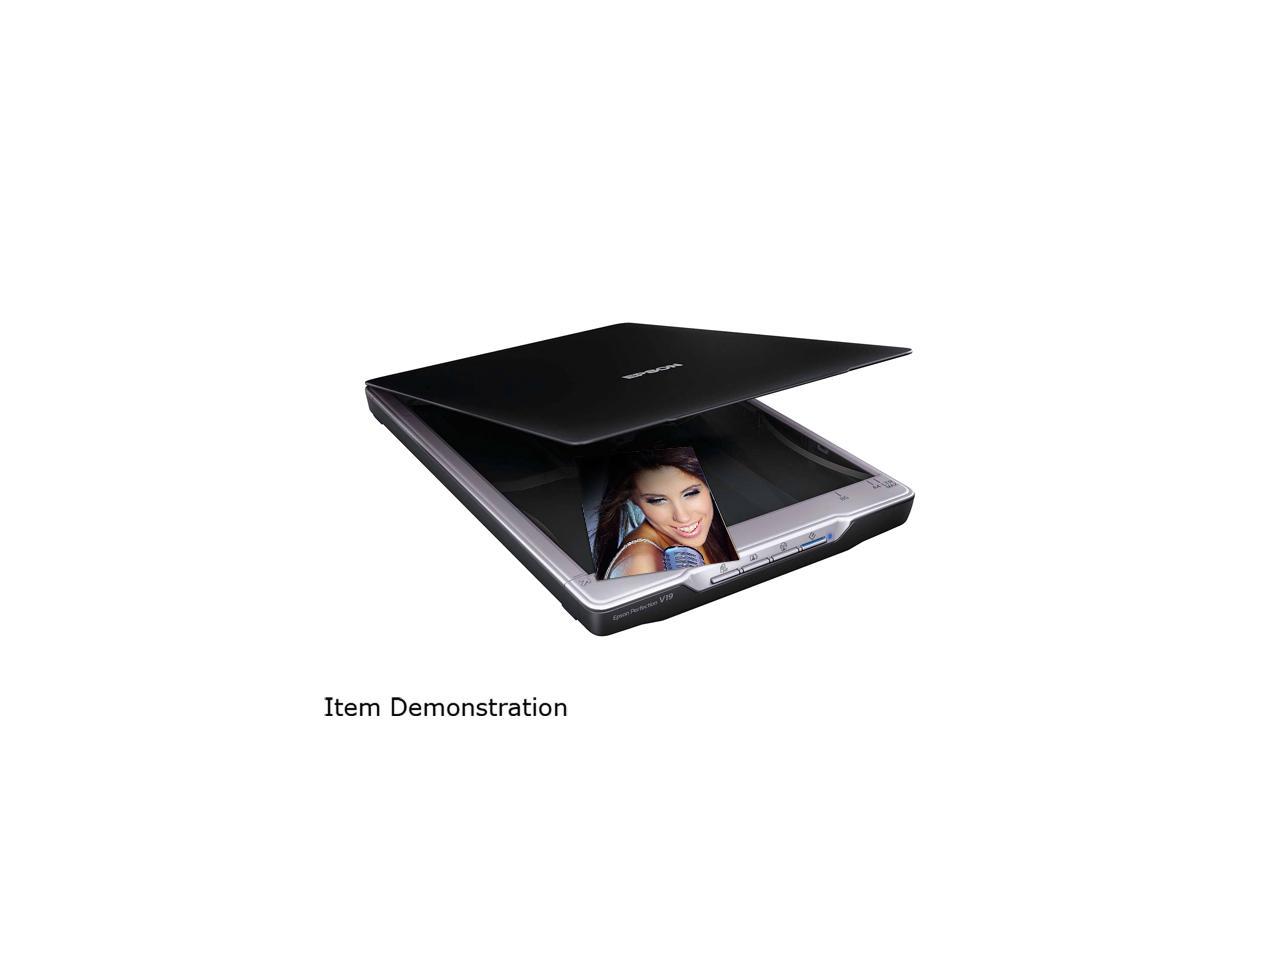 epson perfection v200 scanner review